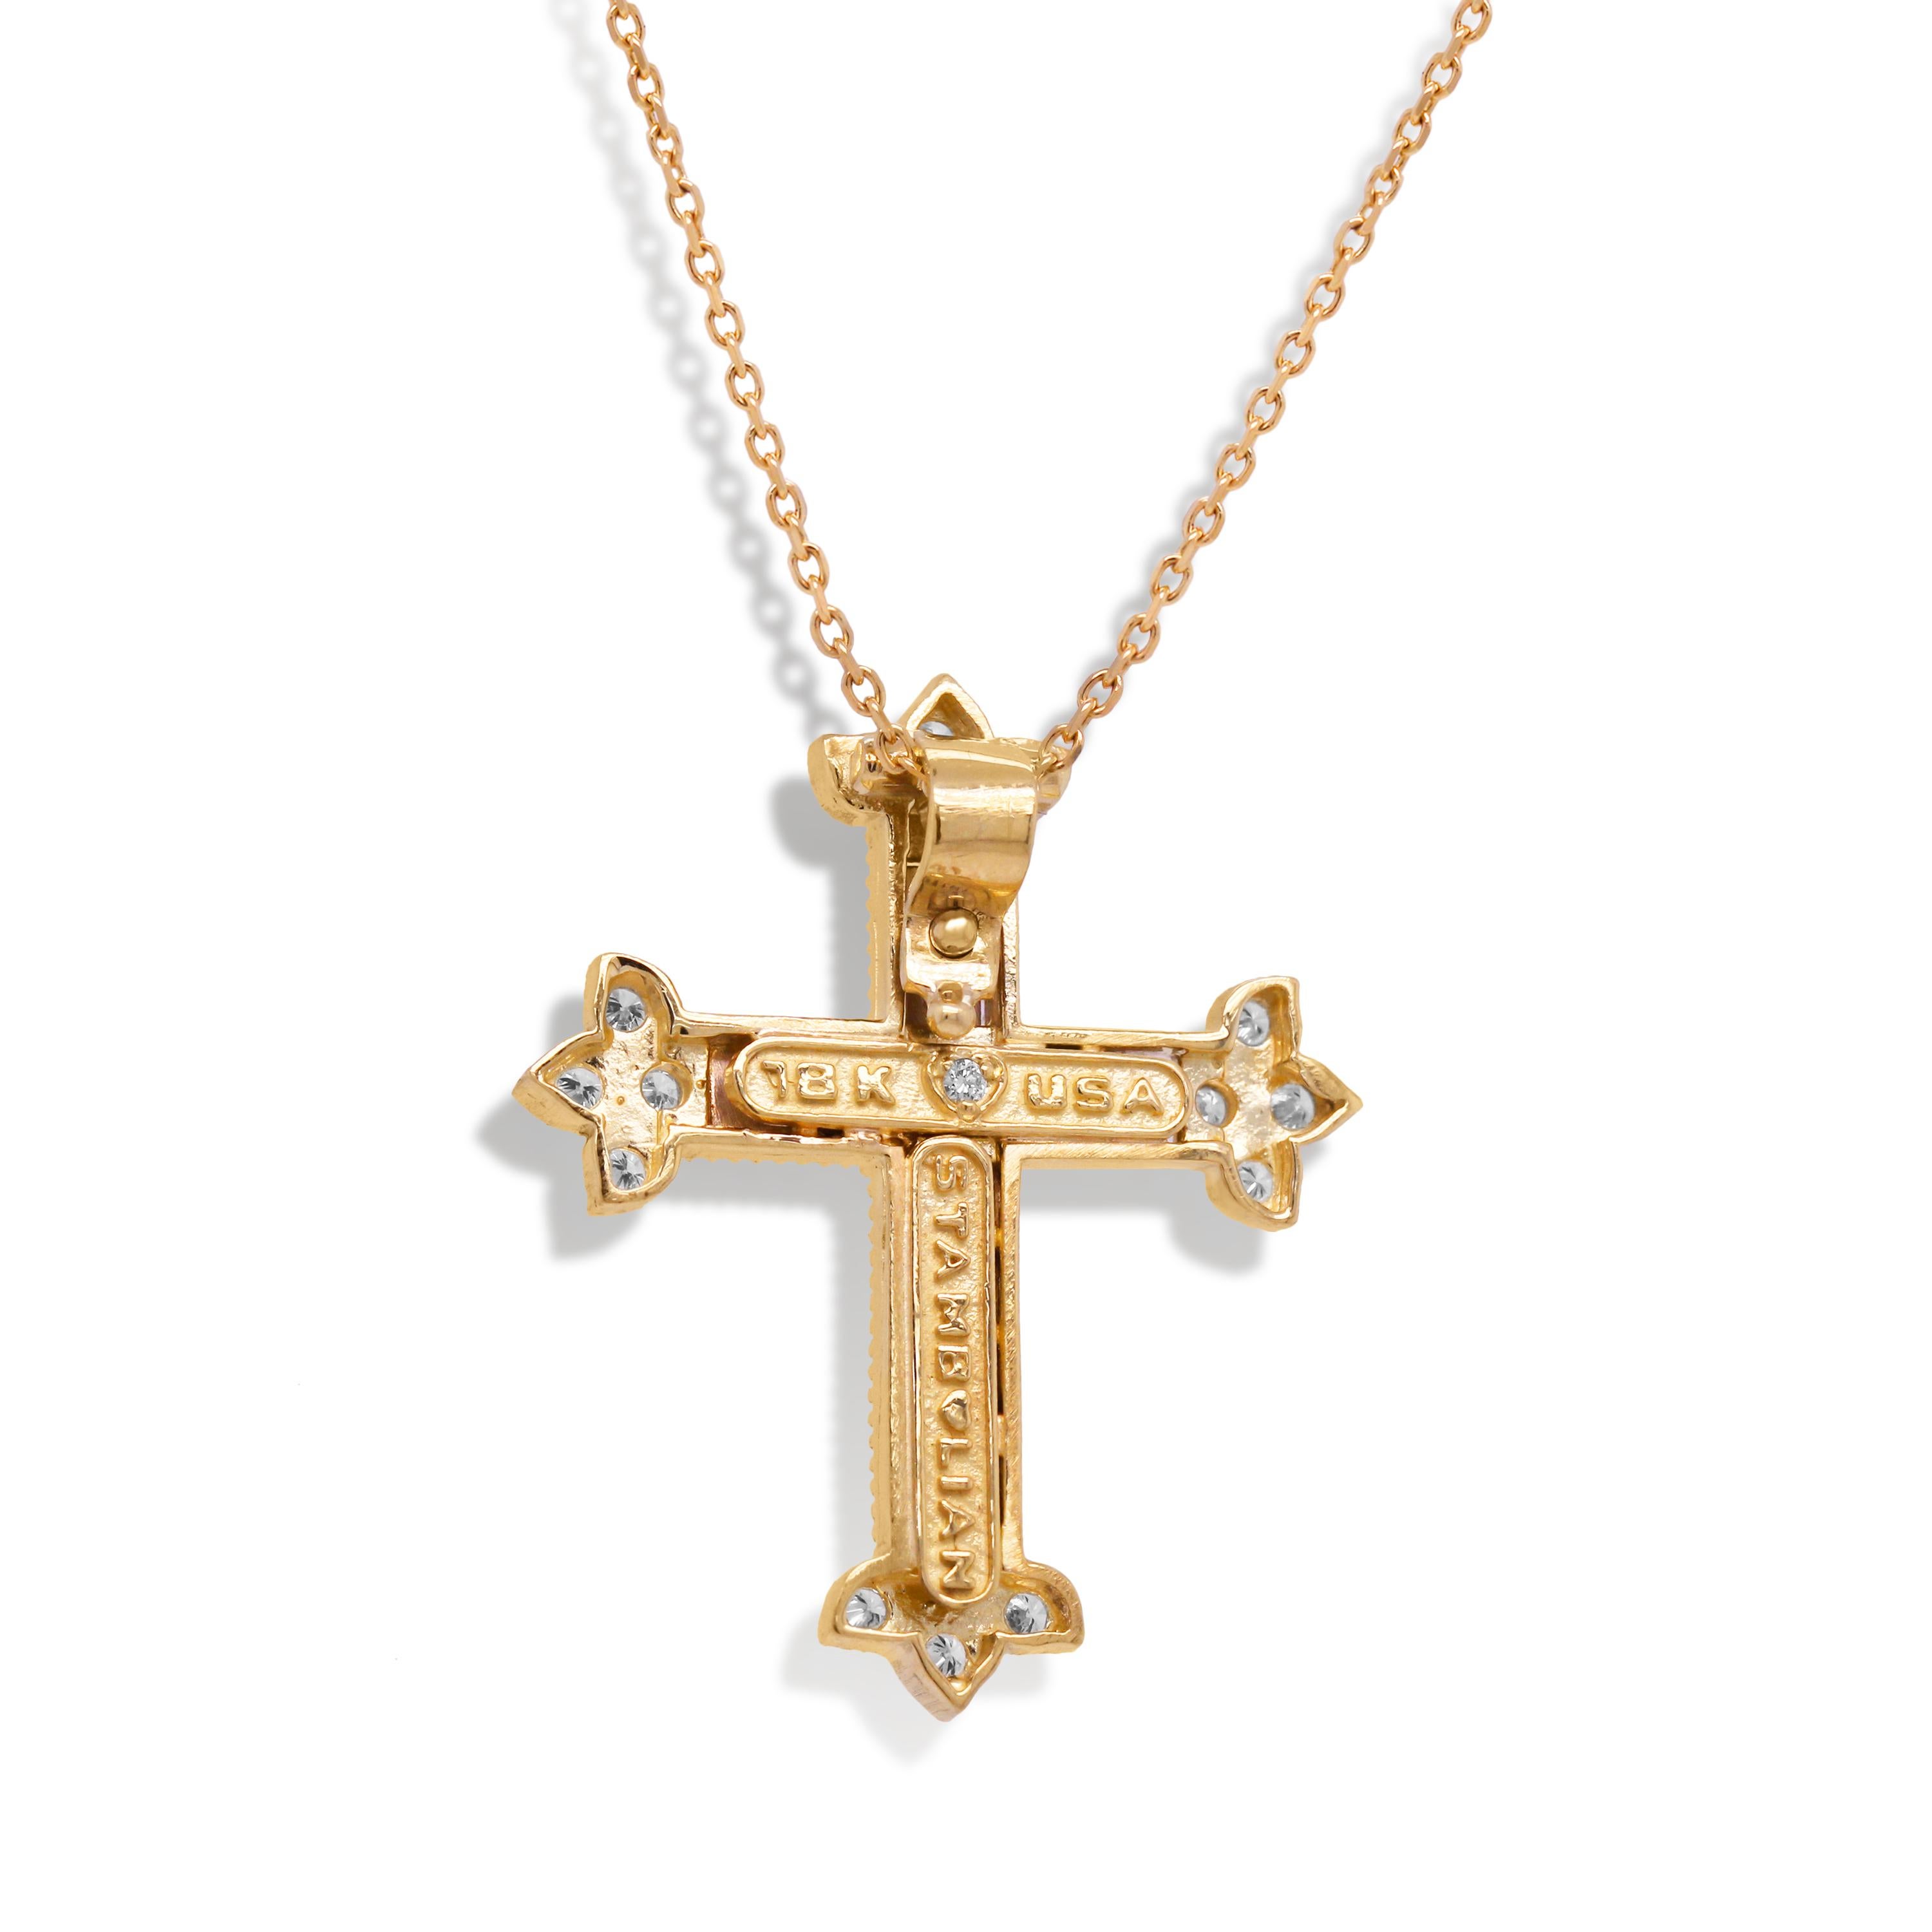 Stambolian 18 Karat Yellow White Gold Diamond Cross Pendant Chain Necklace

Just one of the fabolous crosses made by Stambolian. This one is made in solid 18k yellow gold with diamonds set all over the face.

1.37 carat G color, VS clarity diamonds